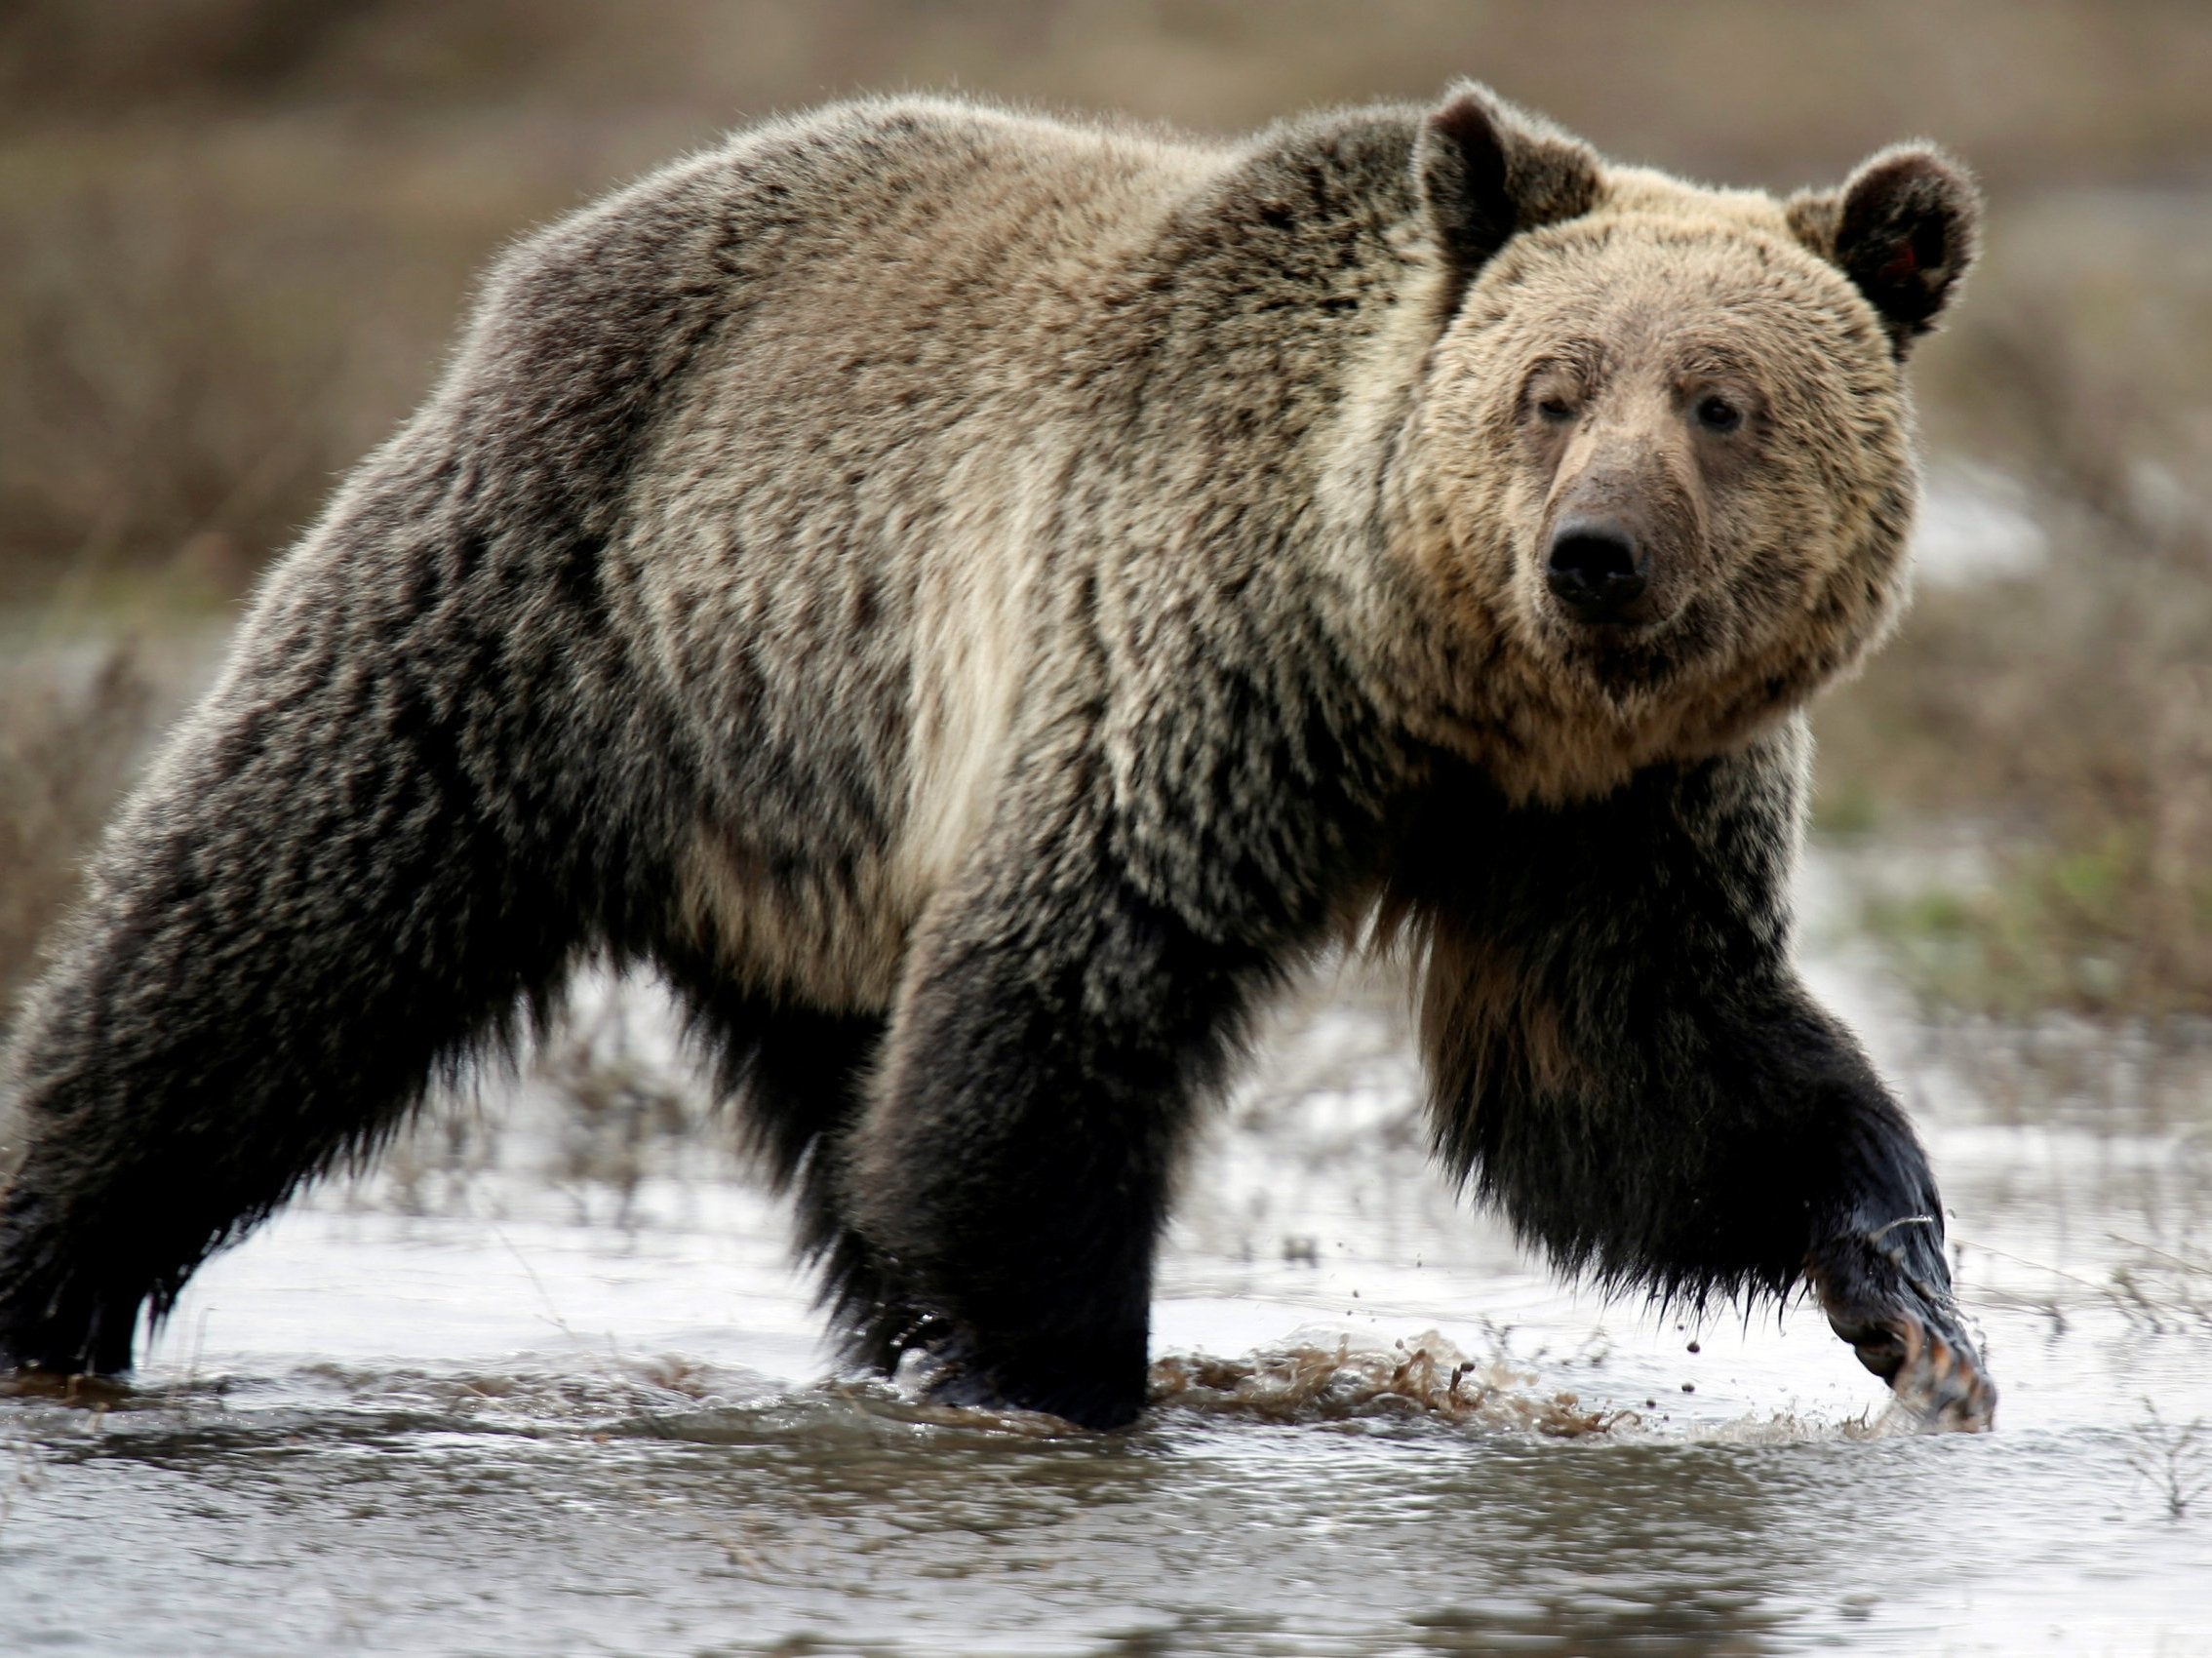 Grizzly, as opposed to grisly, simply means grey or mixed dark and light hairs, from French, ‘gris’